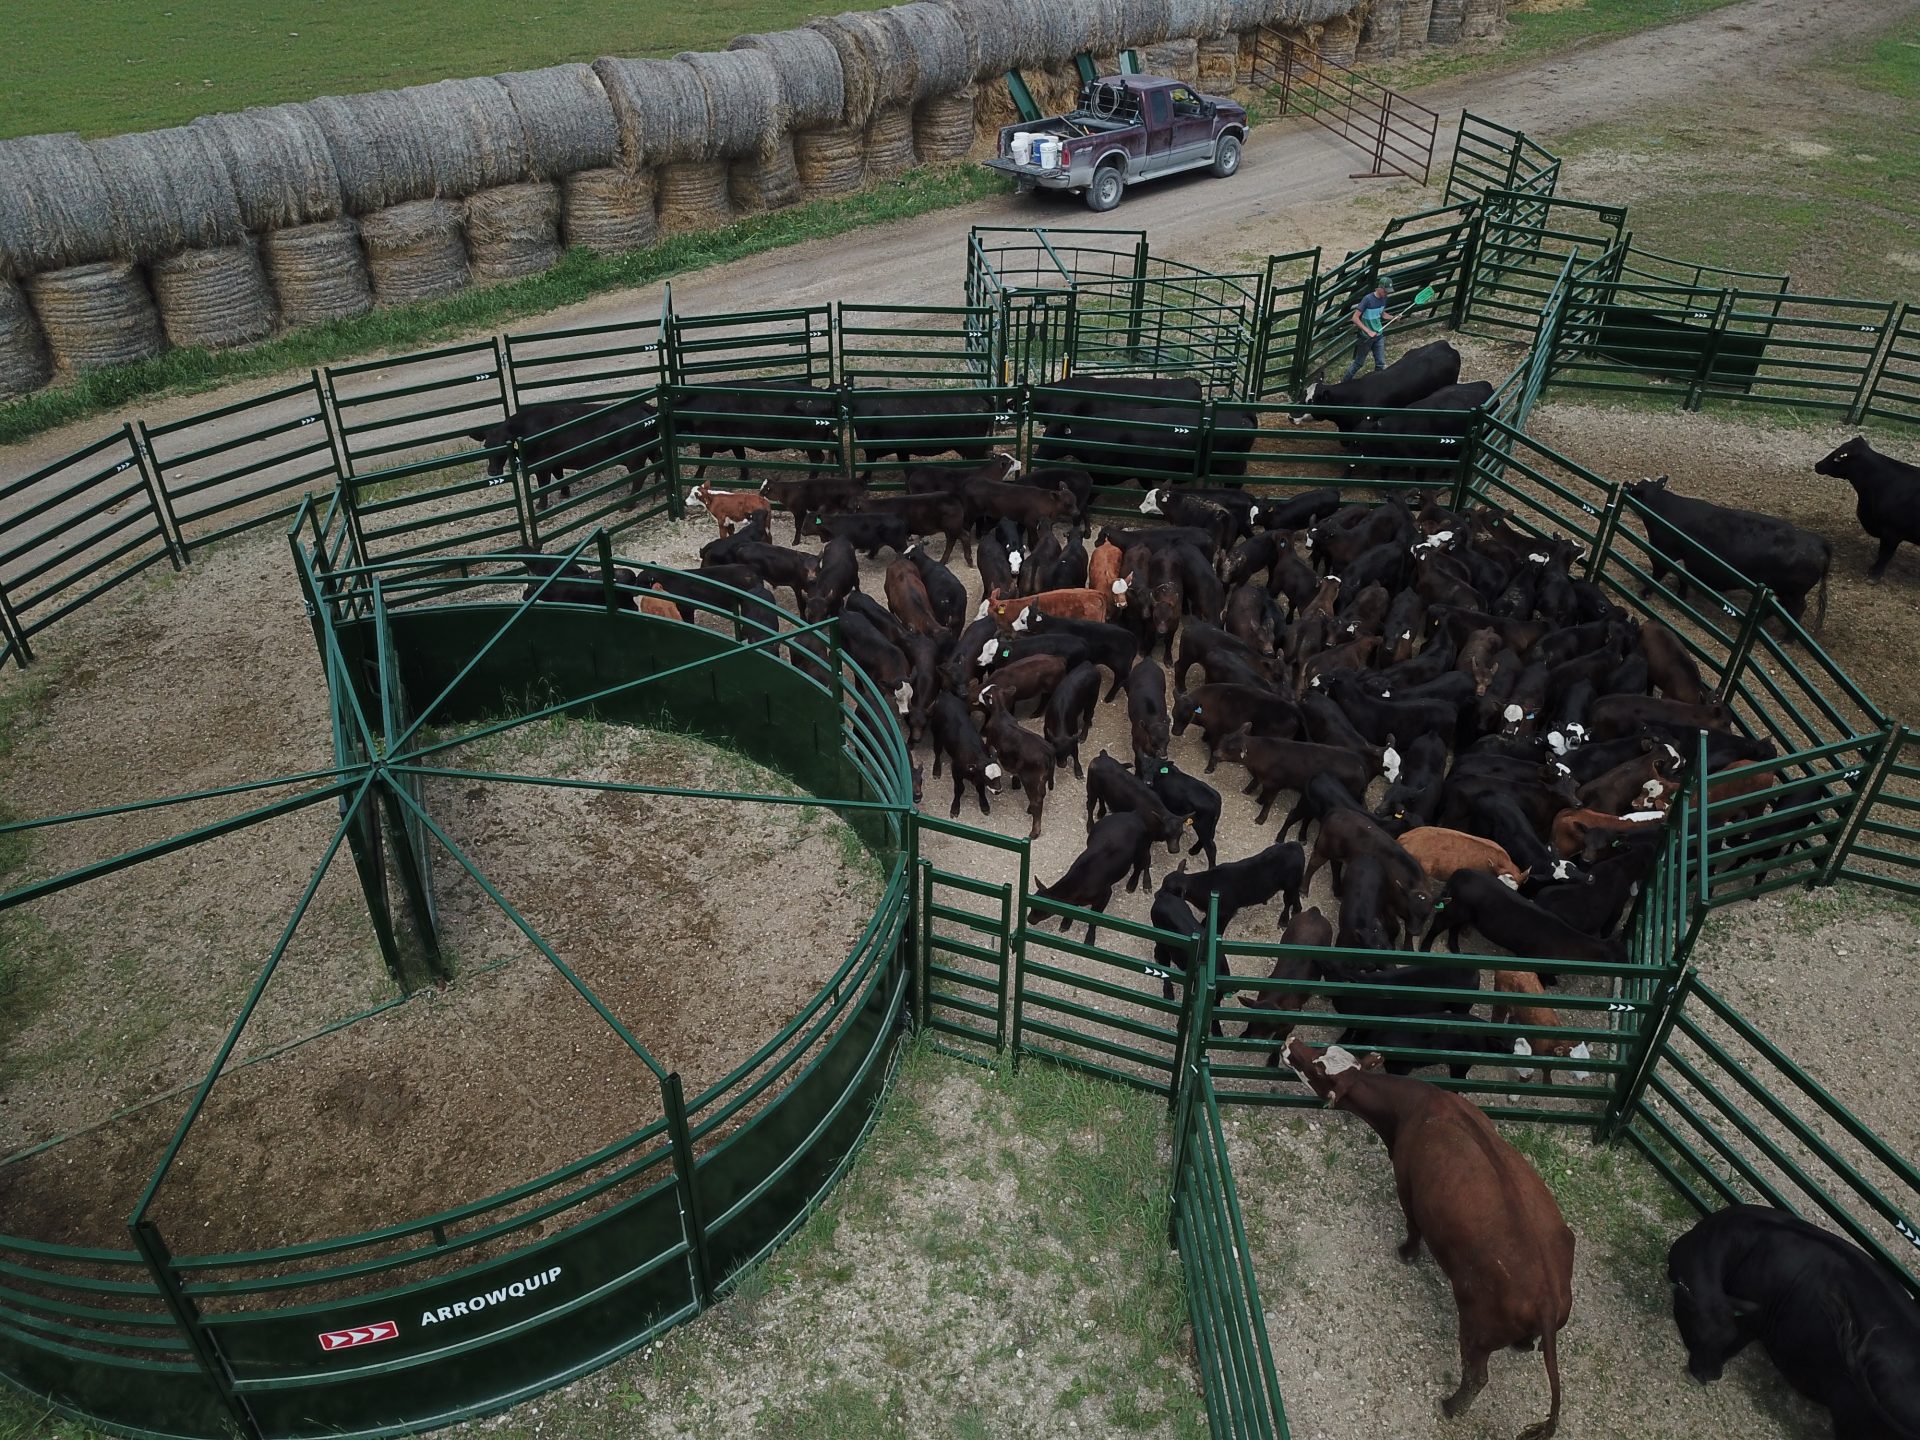 Group of cattle preparing to be worked through handling system